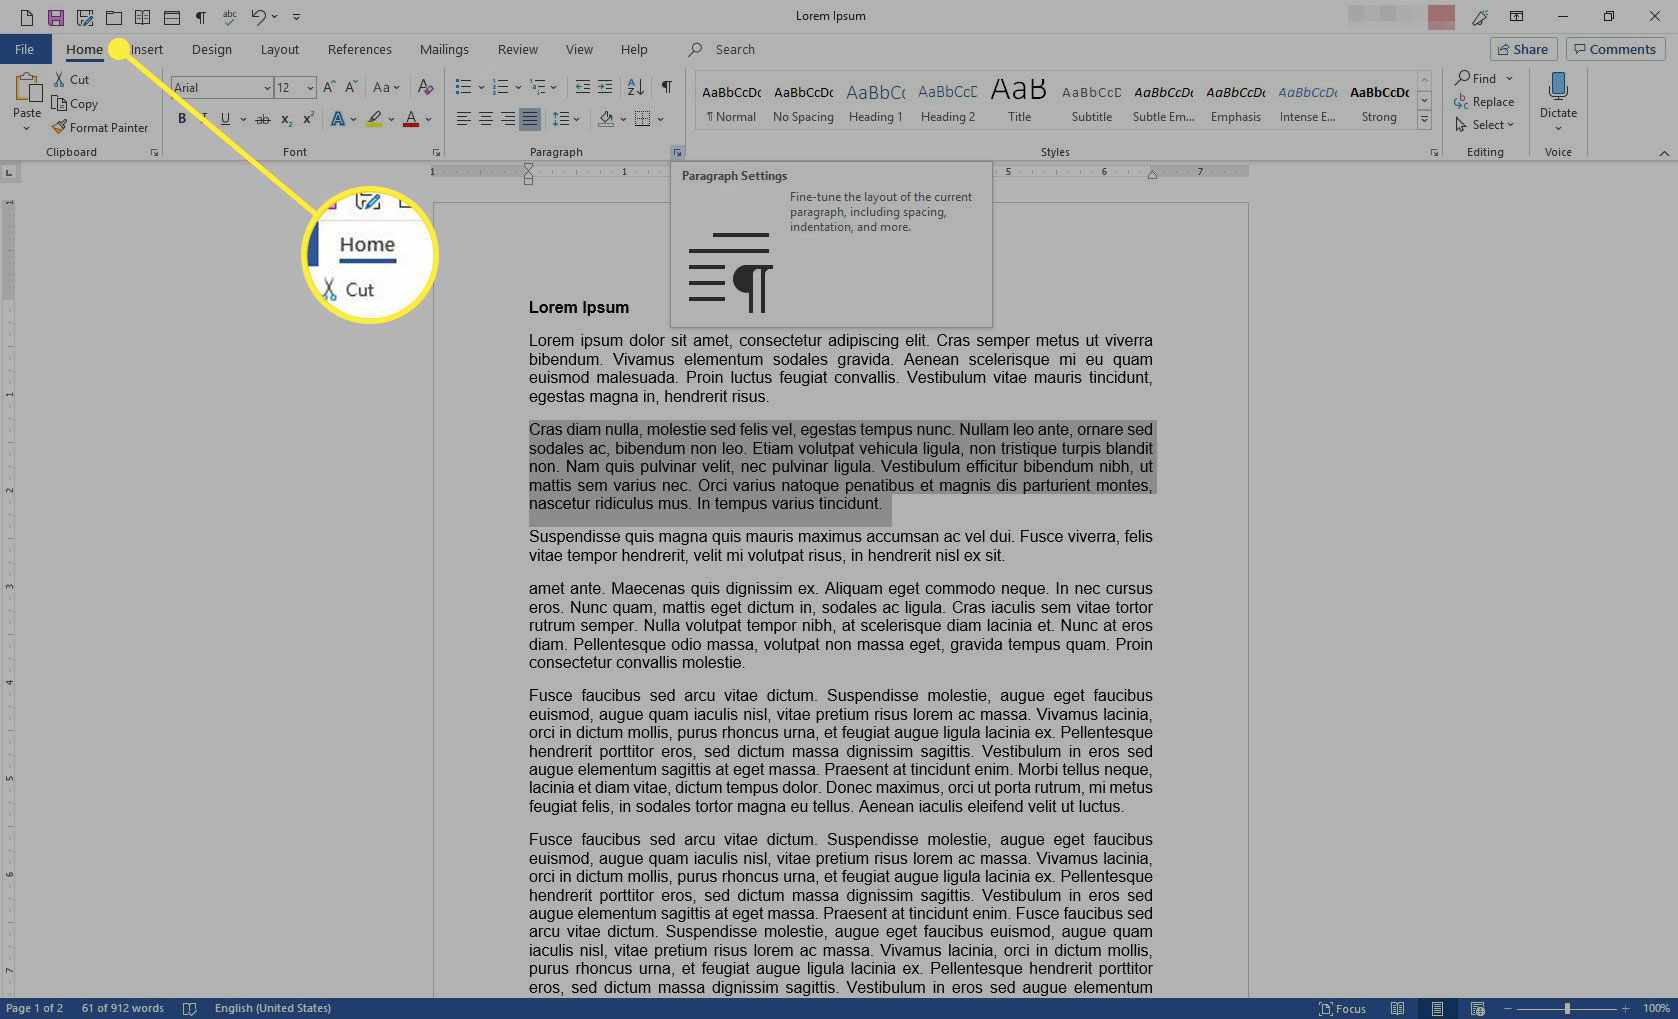 microsoft word for mac shortcut for increase indent